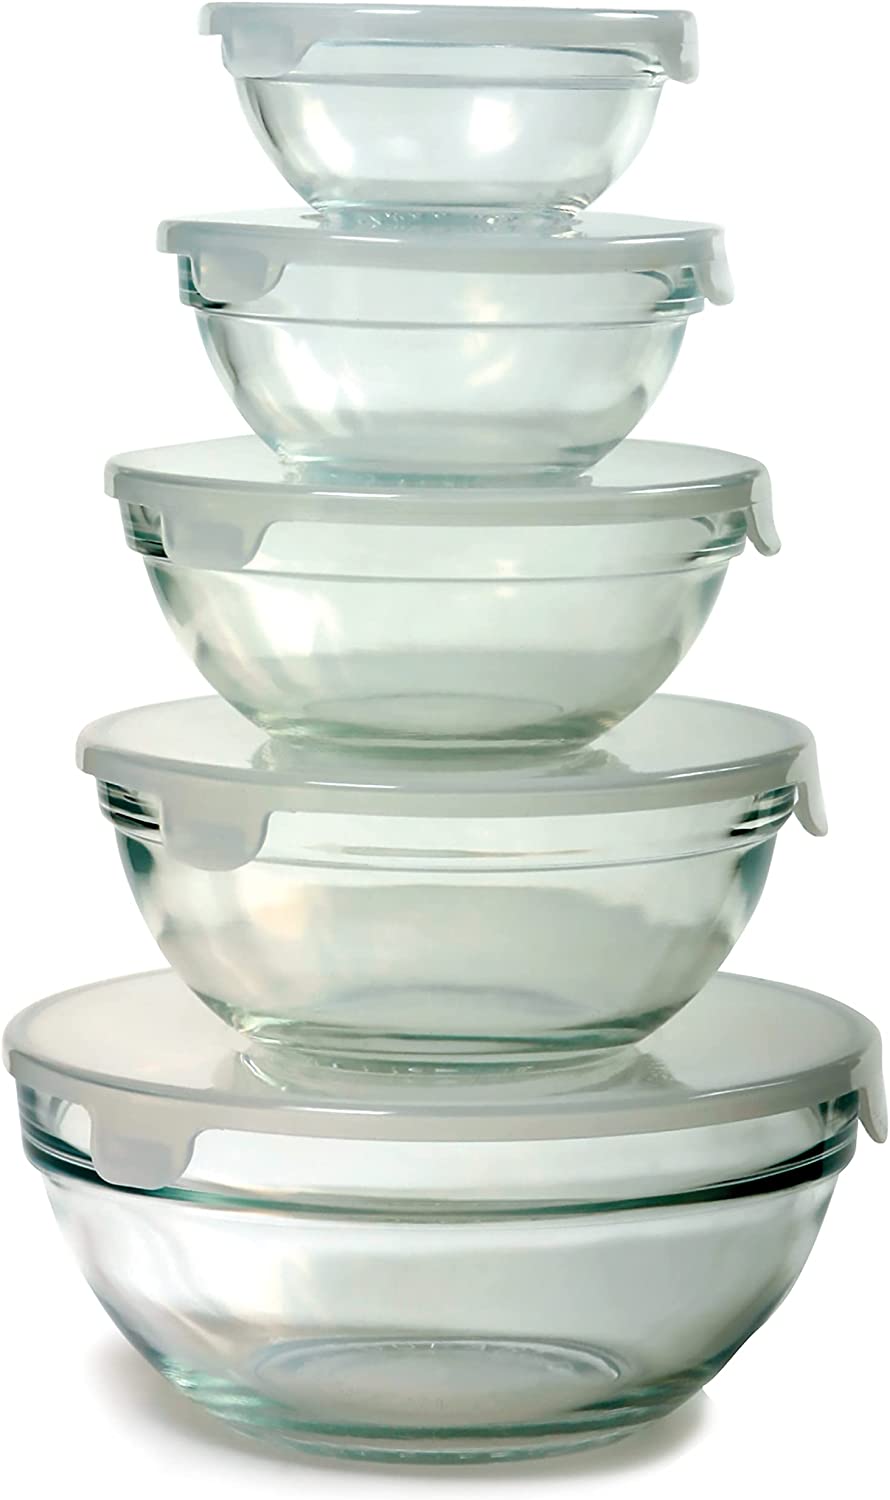 5 empty bowls with lids stacked on each other.